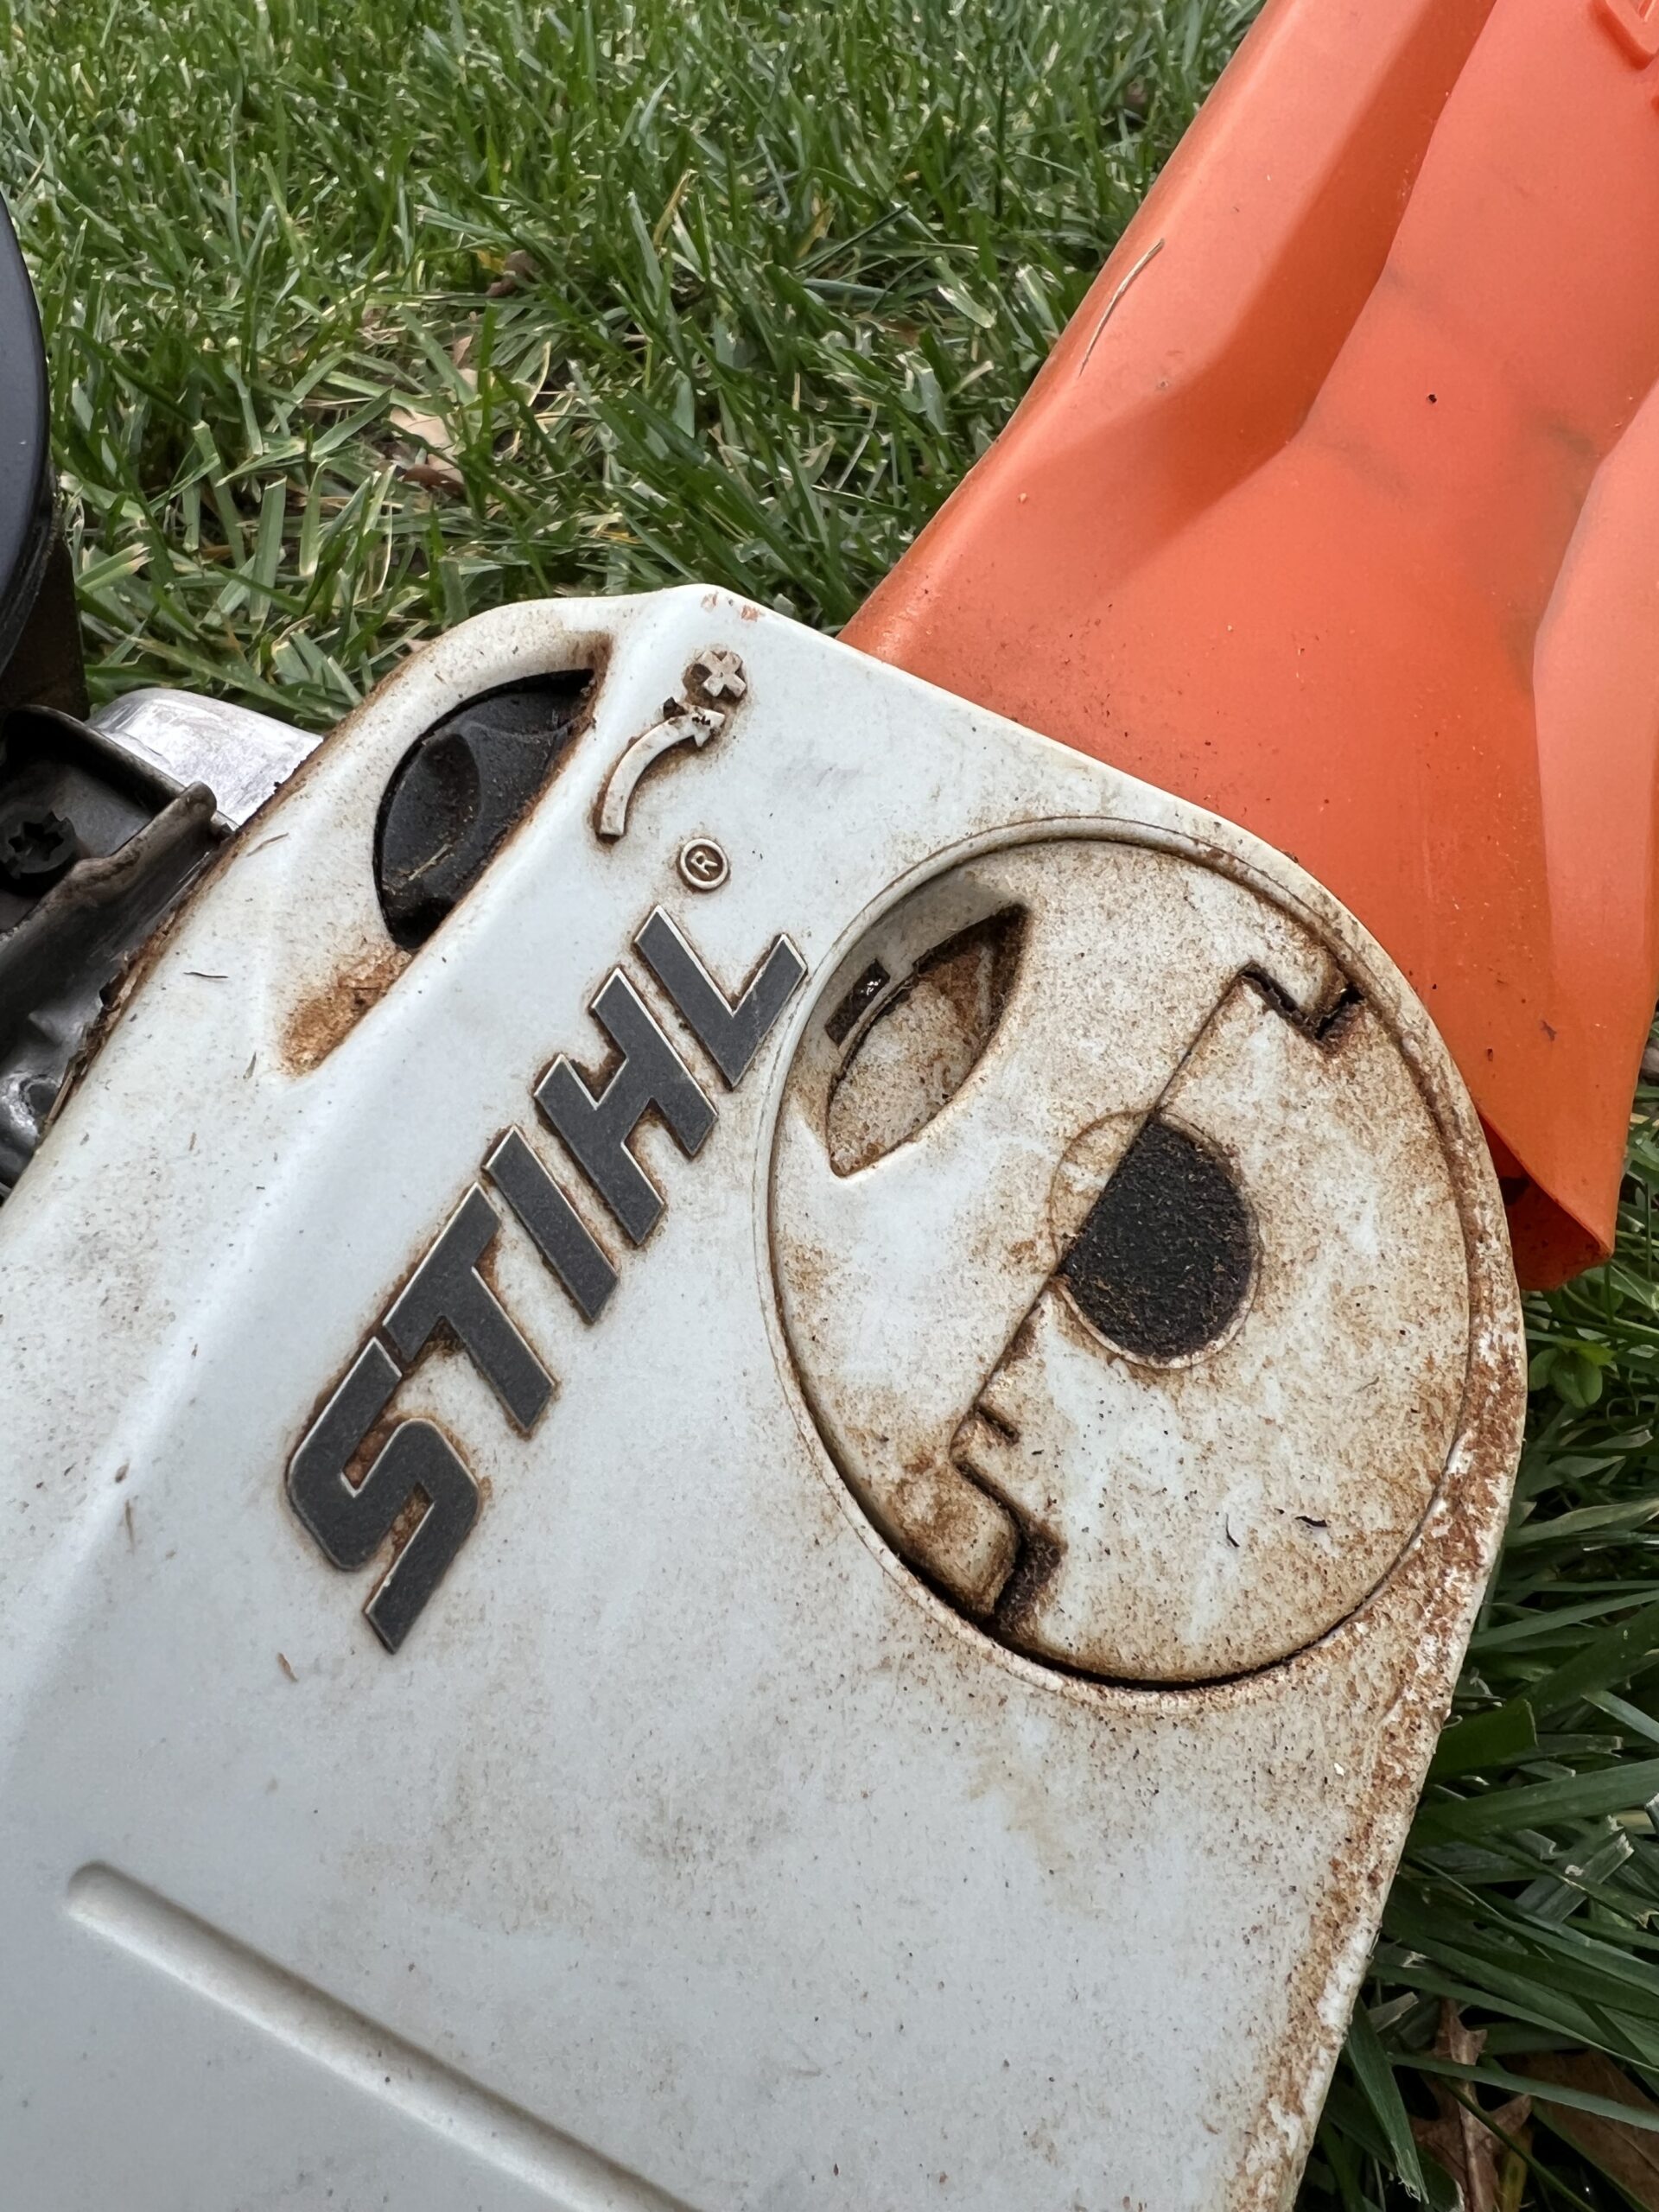 tension system on the Stihl MS 251 c